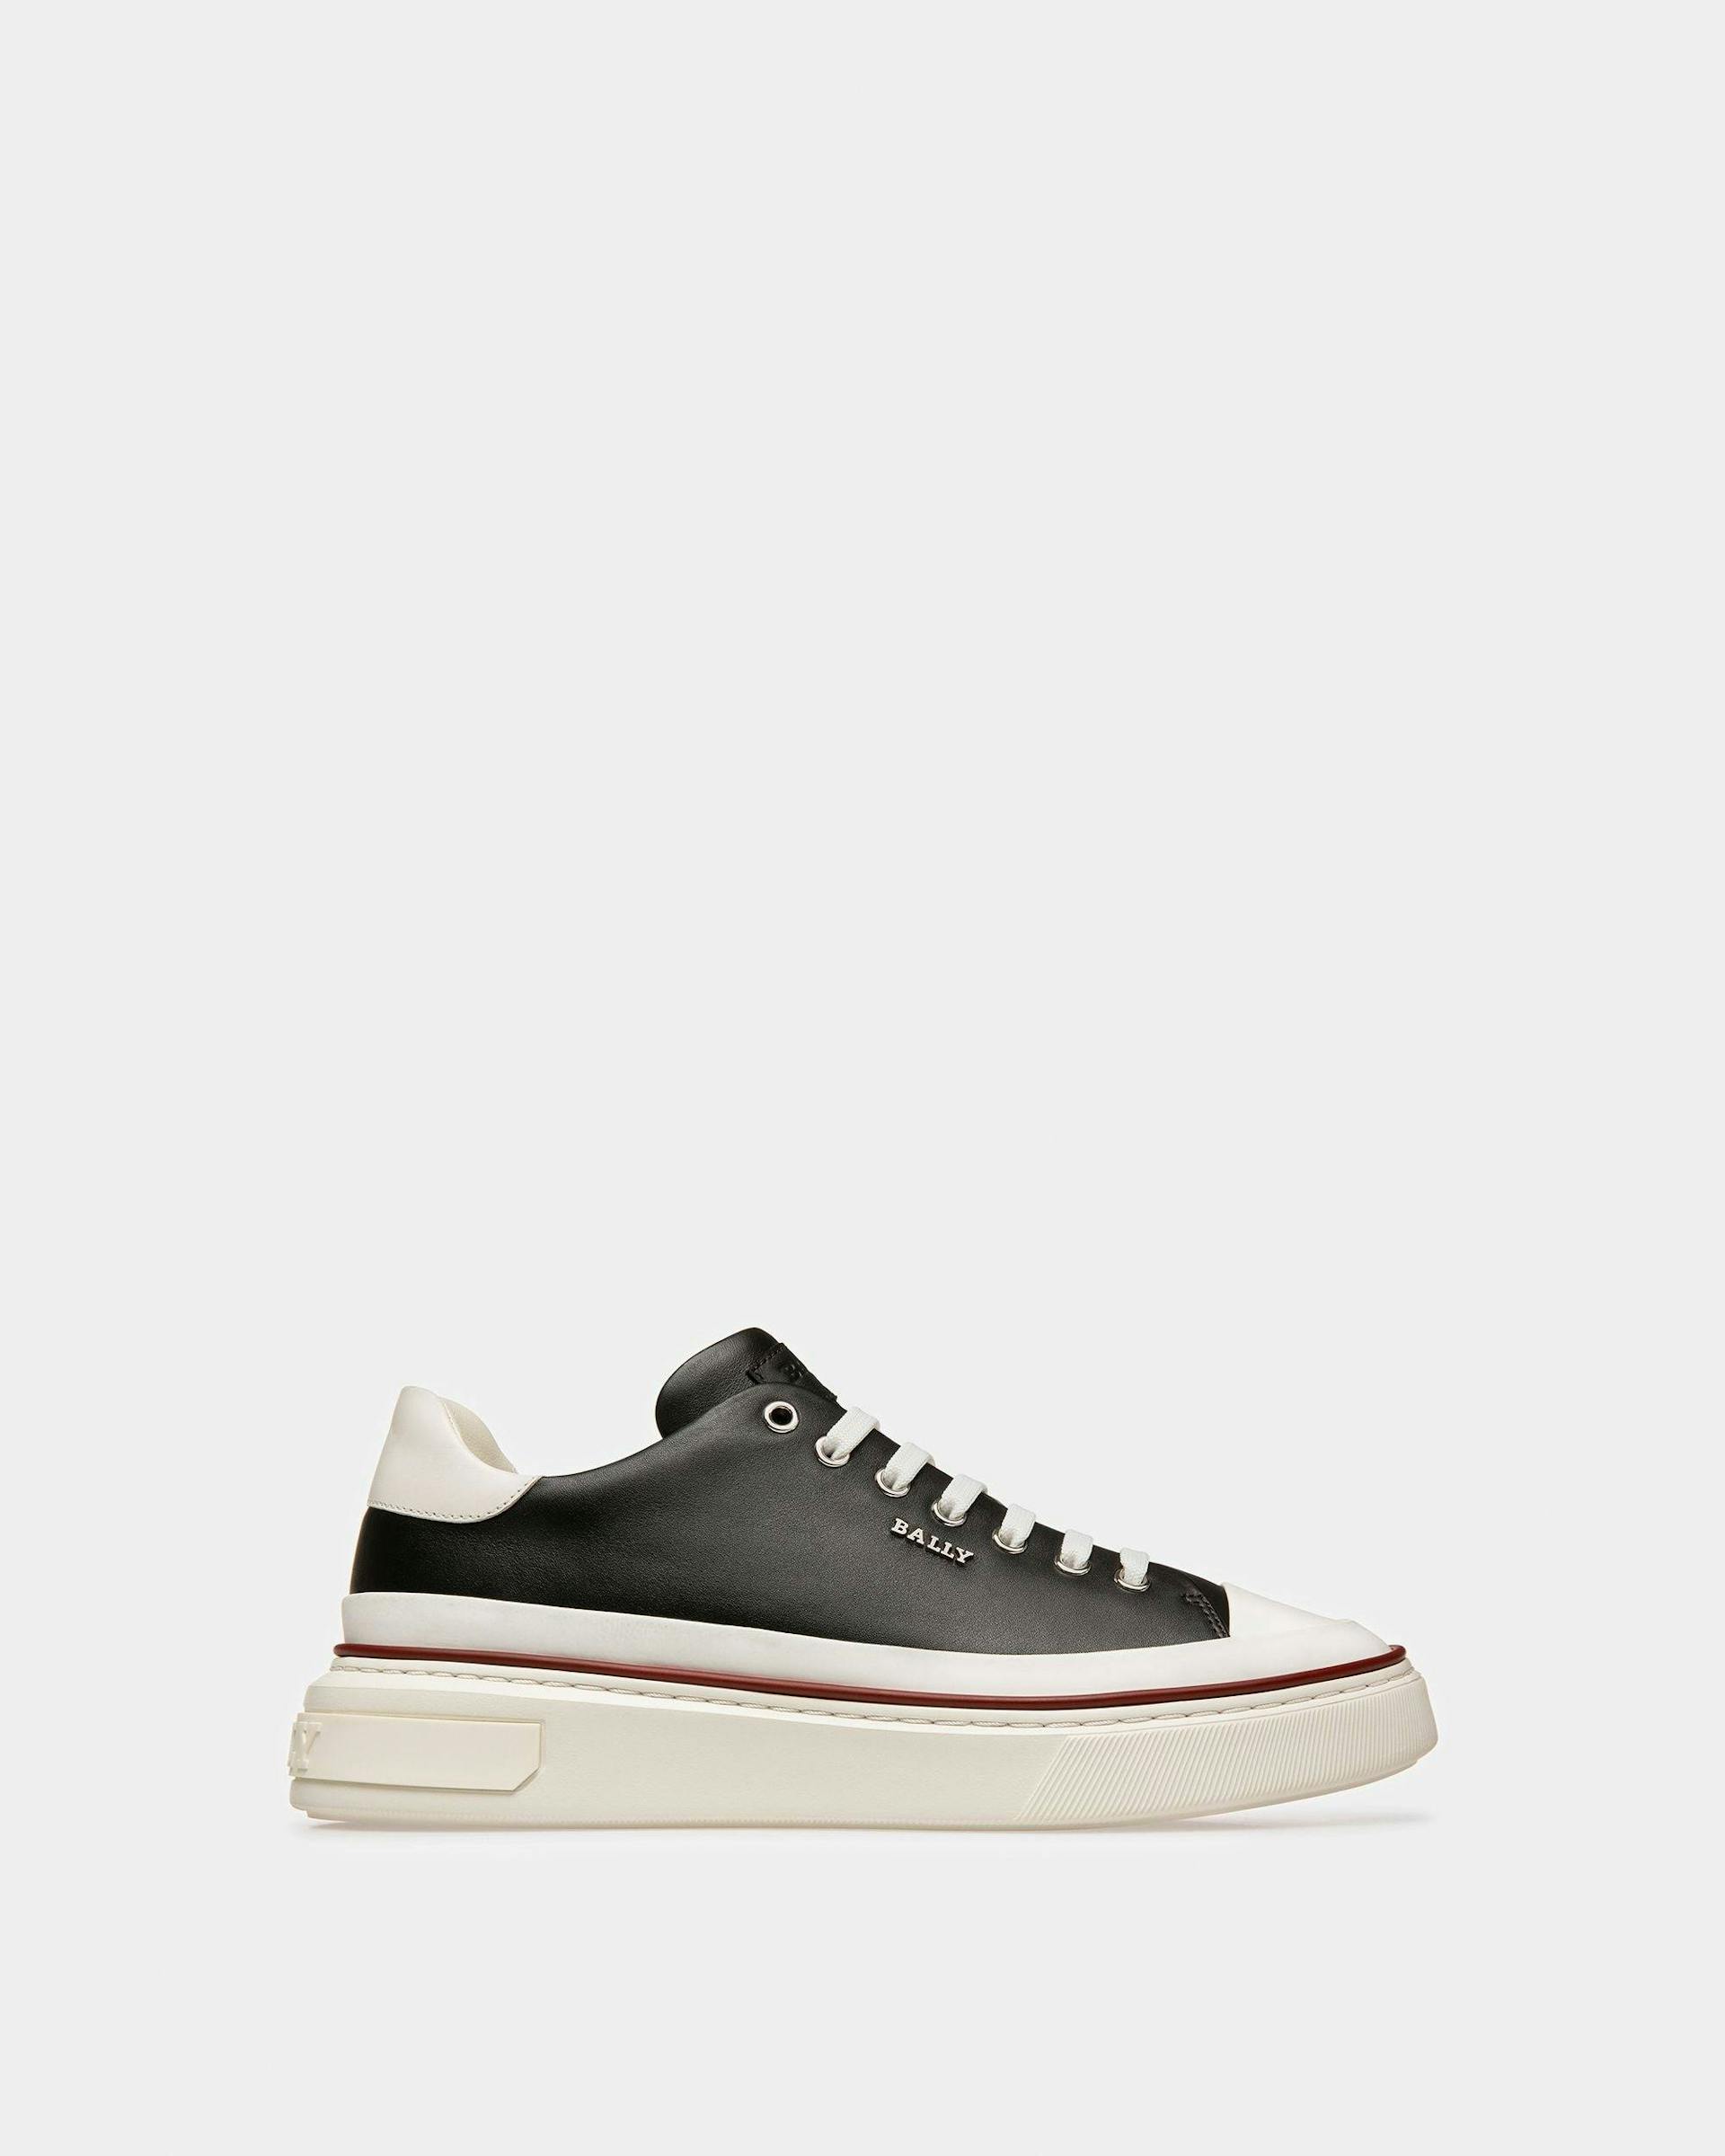 Maily Leather Sneakers In Black & White - Men's - Bally - 01